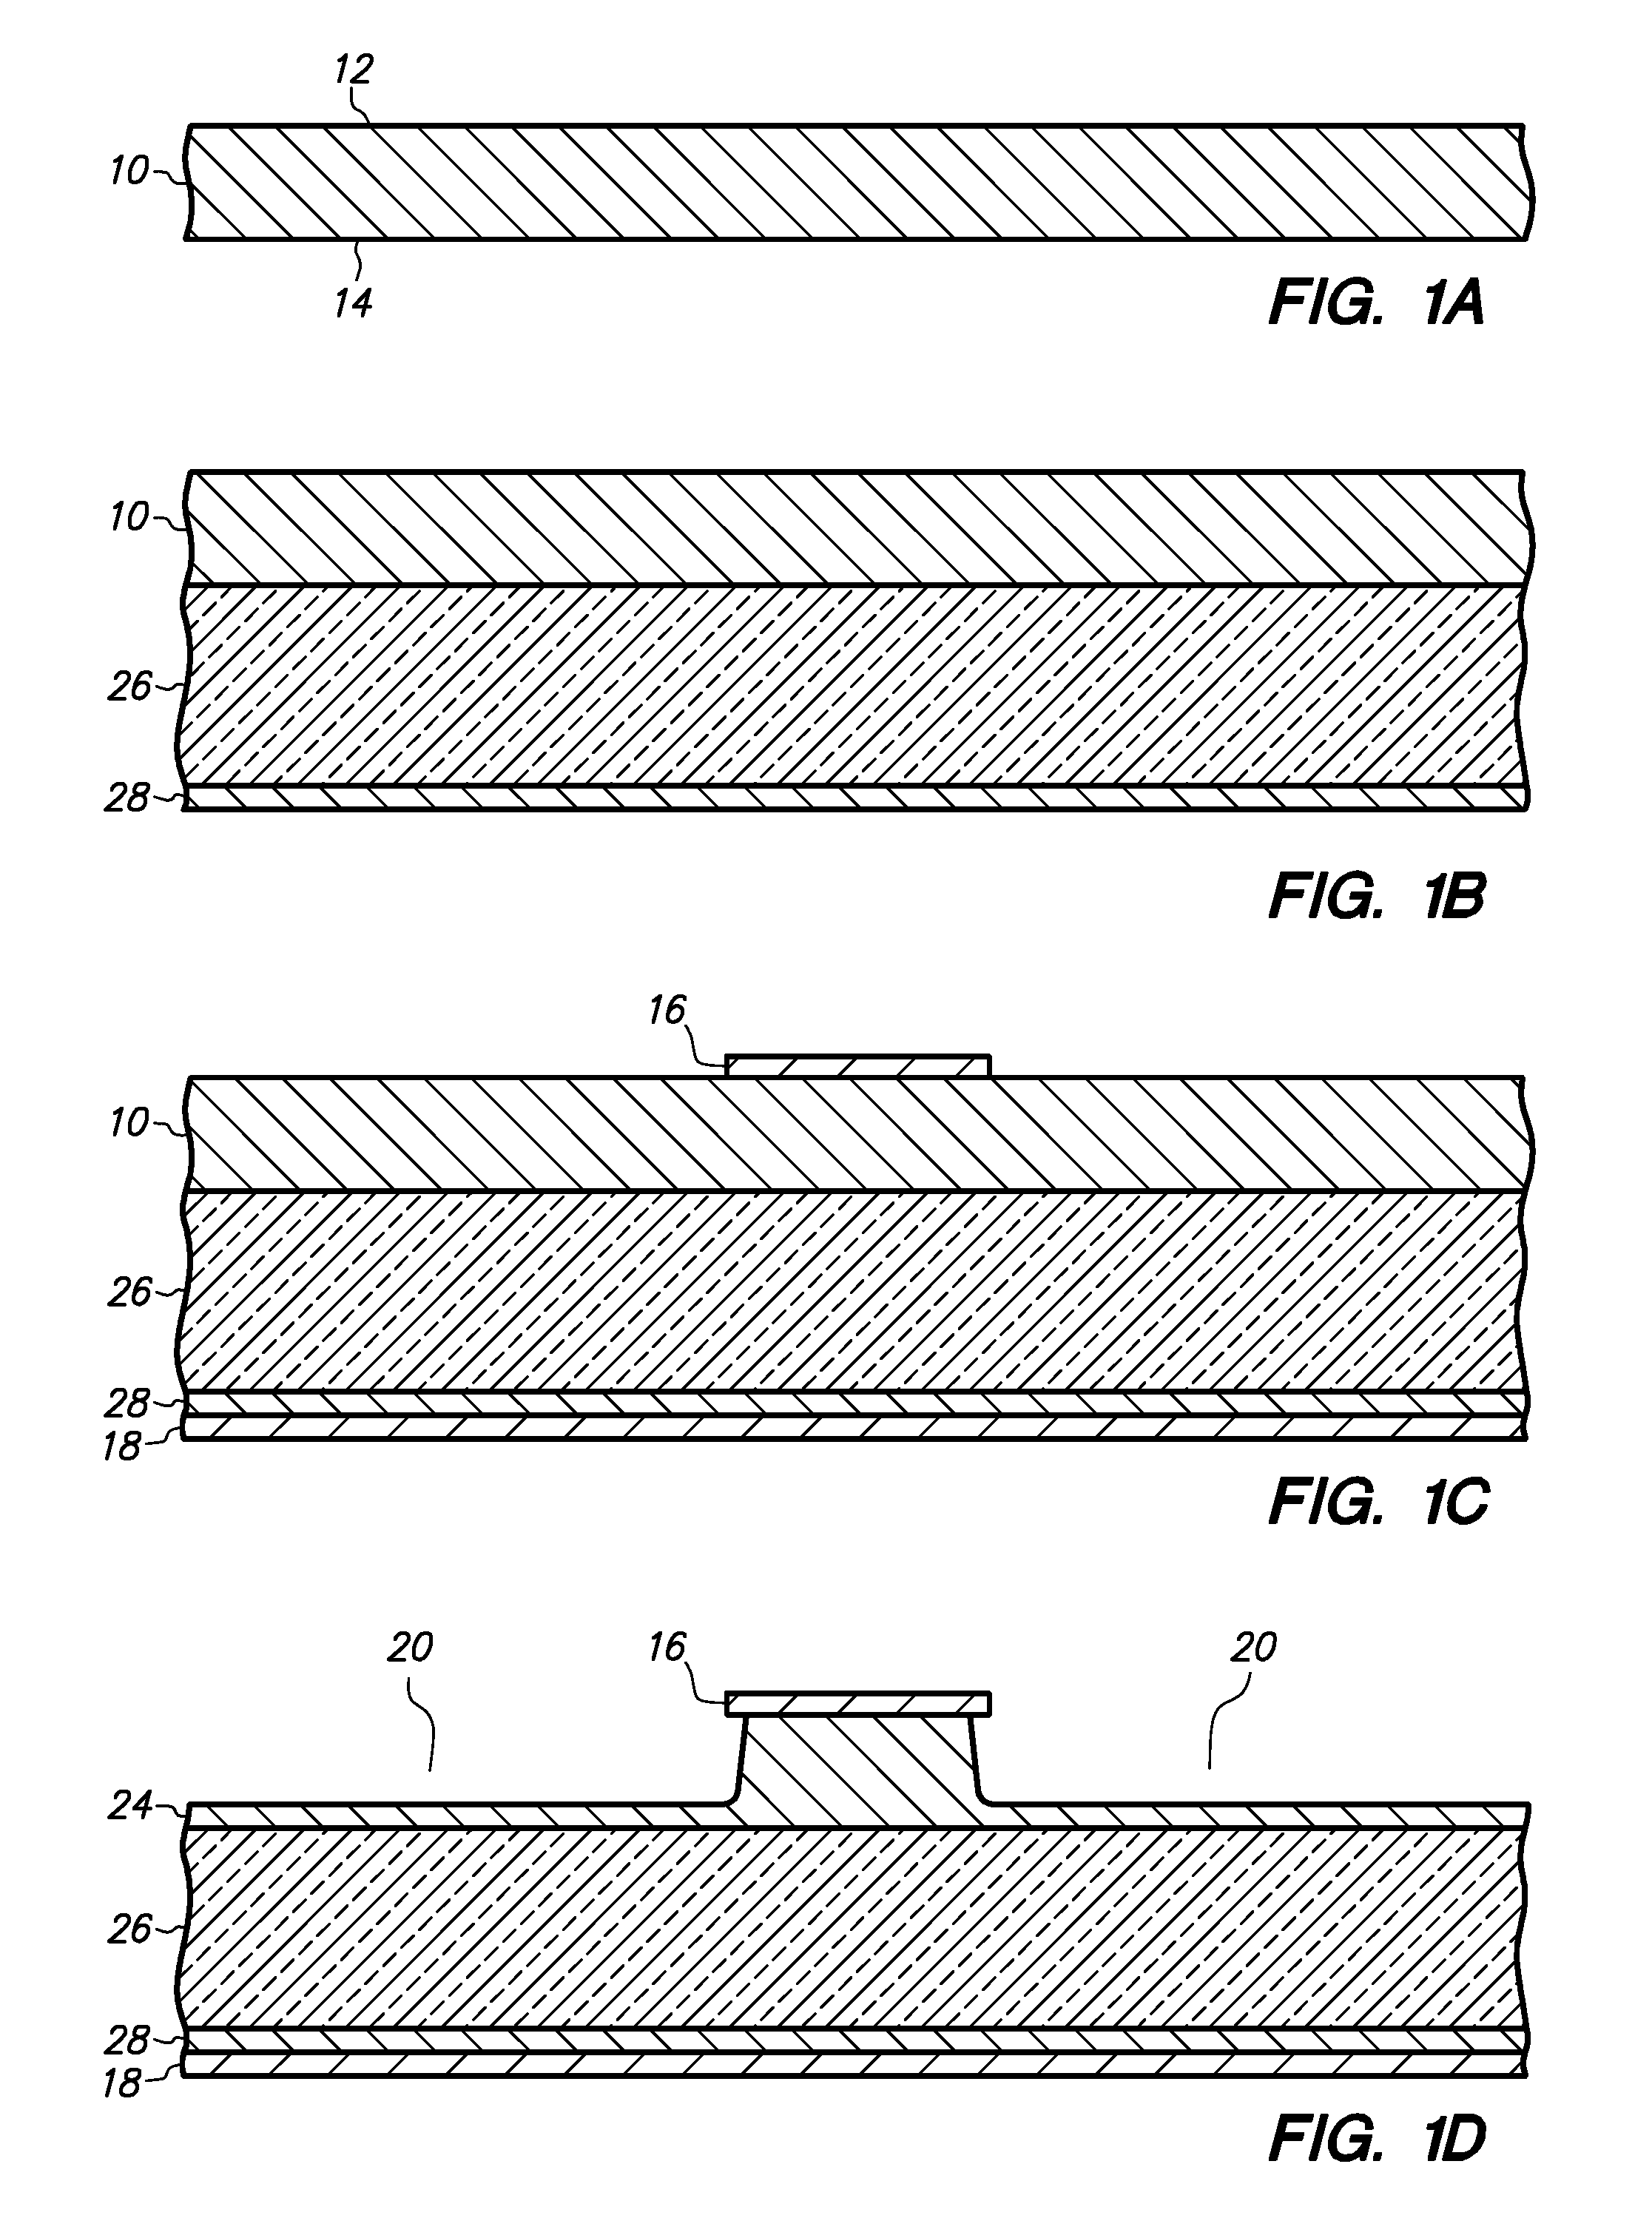 Method of making a semiconductor chip assembly with a post/base heat spreader with a thermal via